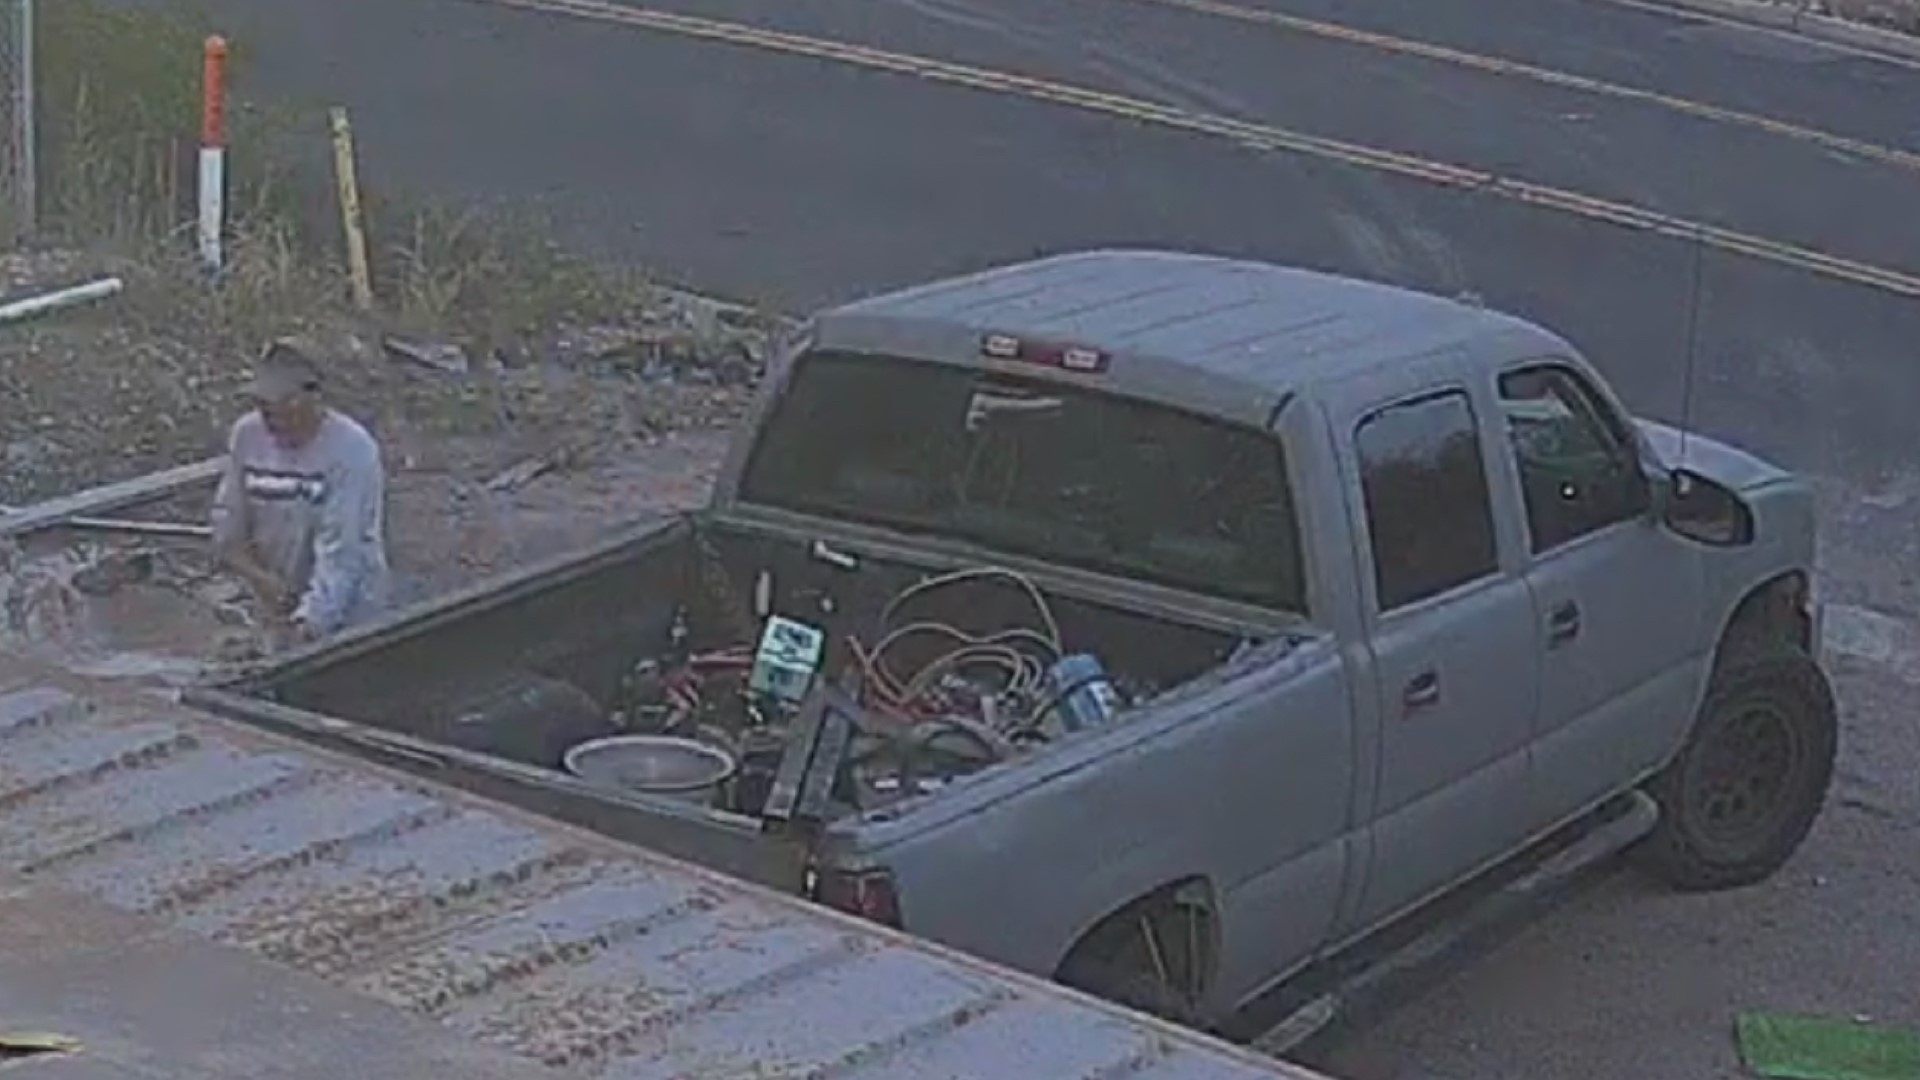 Police are searching for a man who stolen around $16,000-worth of welding and construction equipment earlier this month.